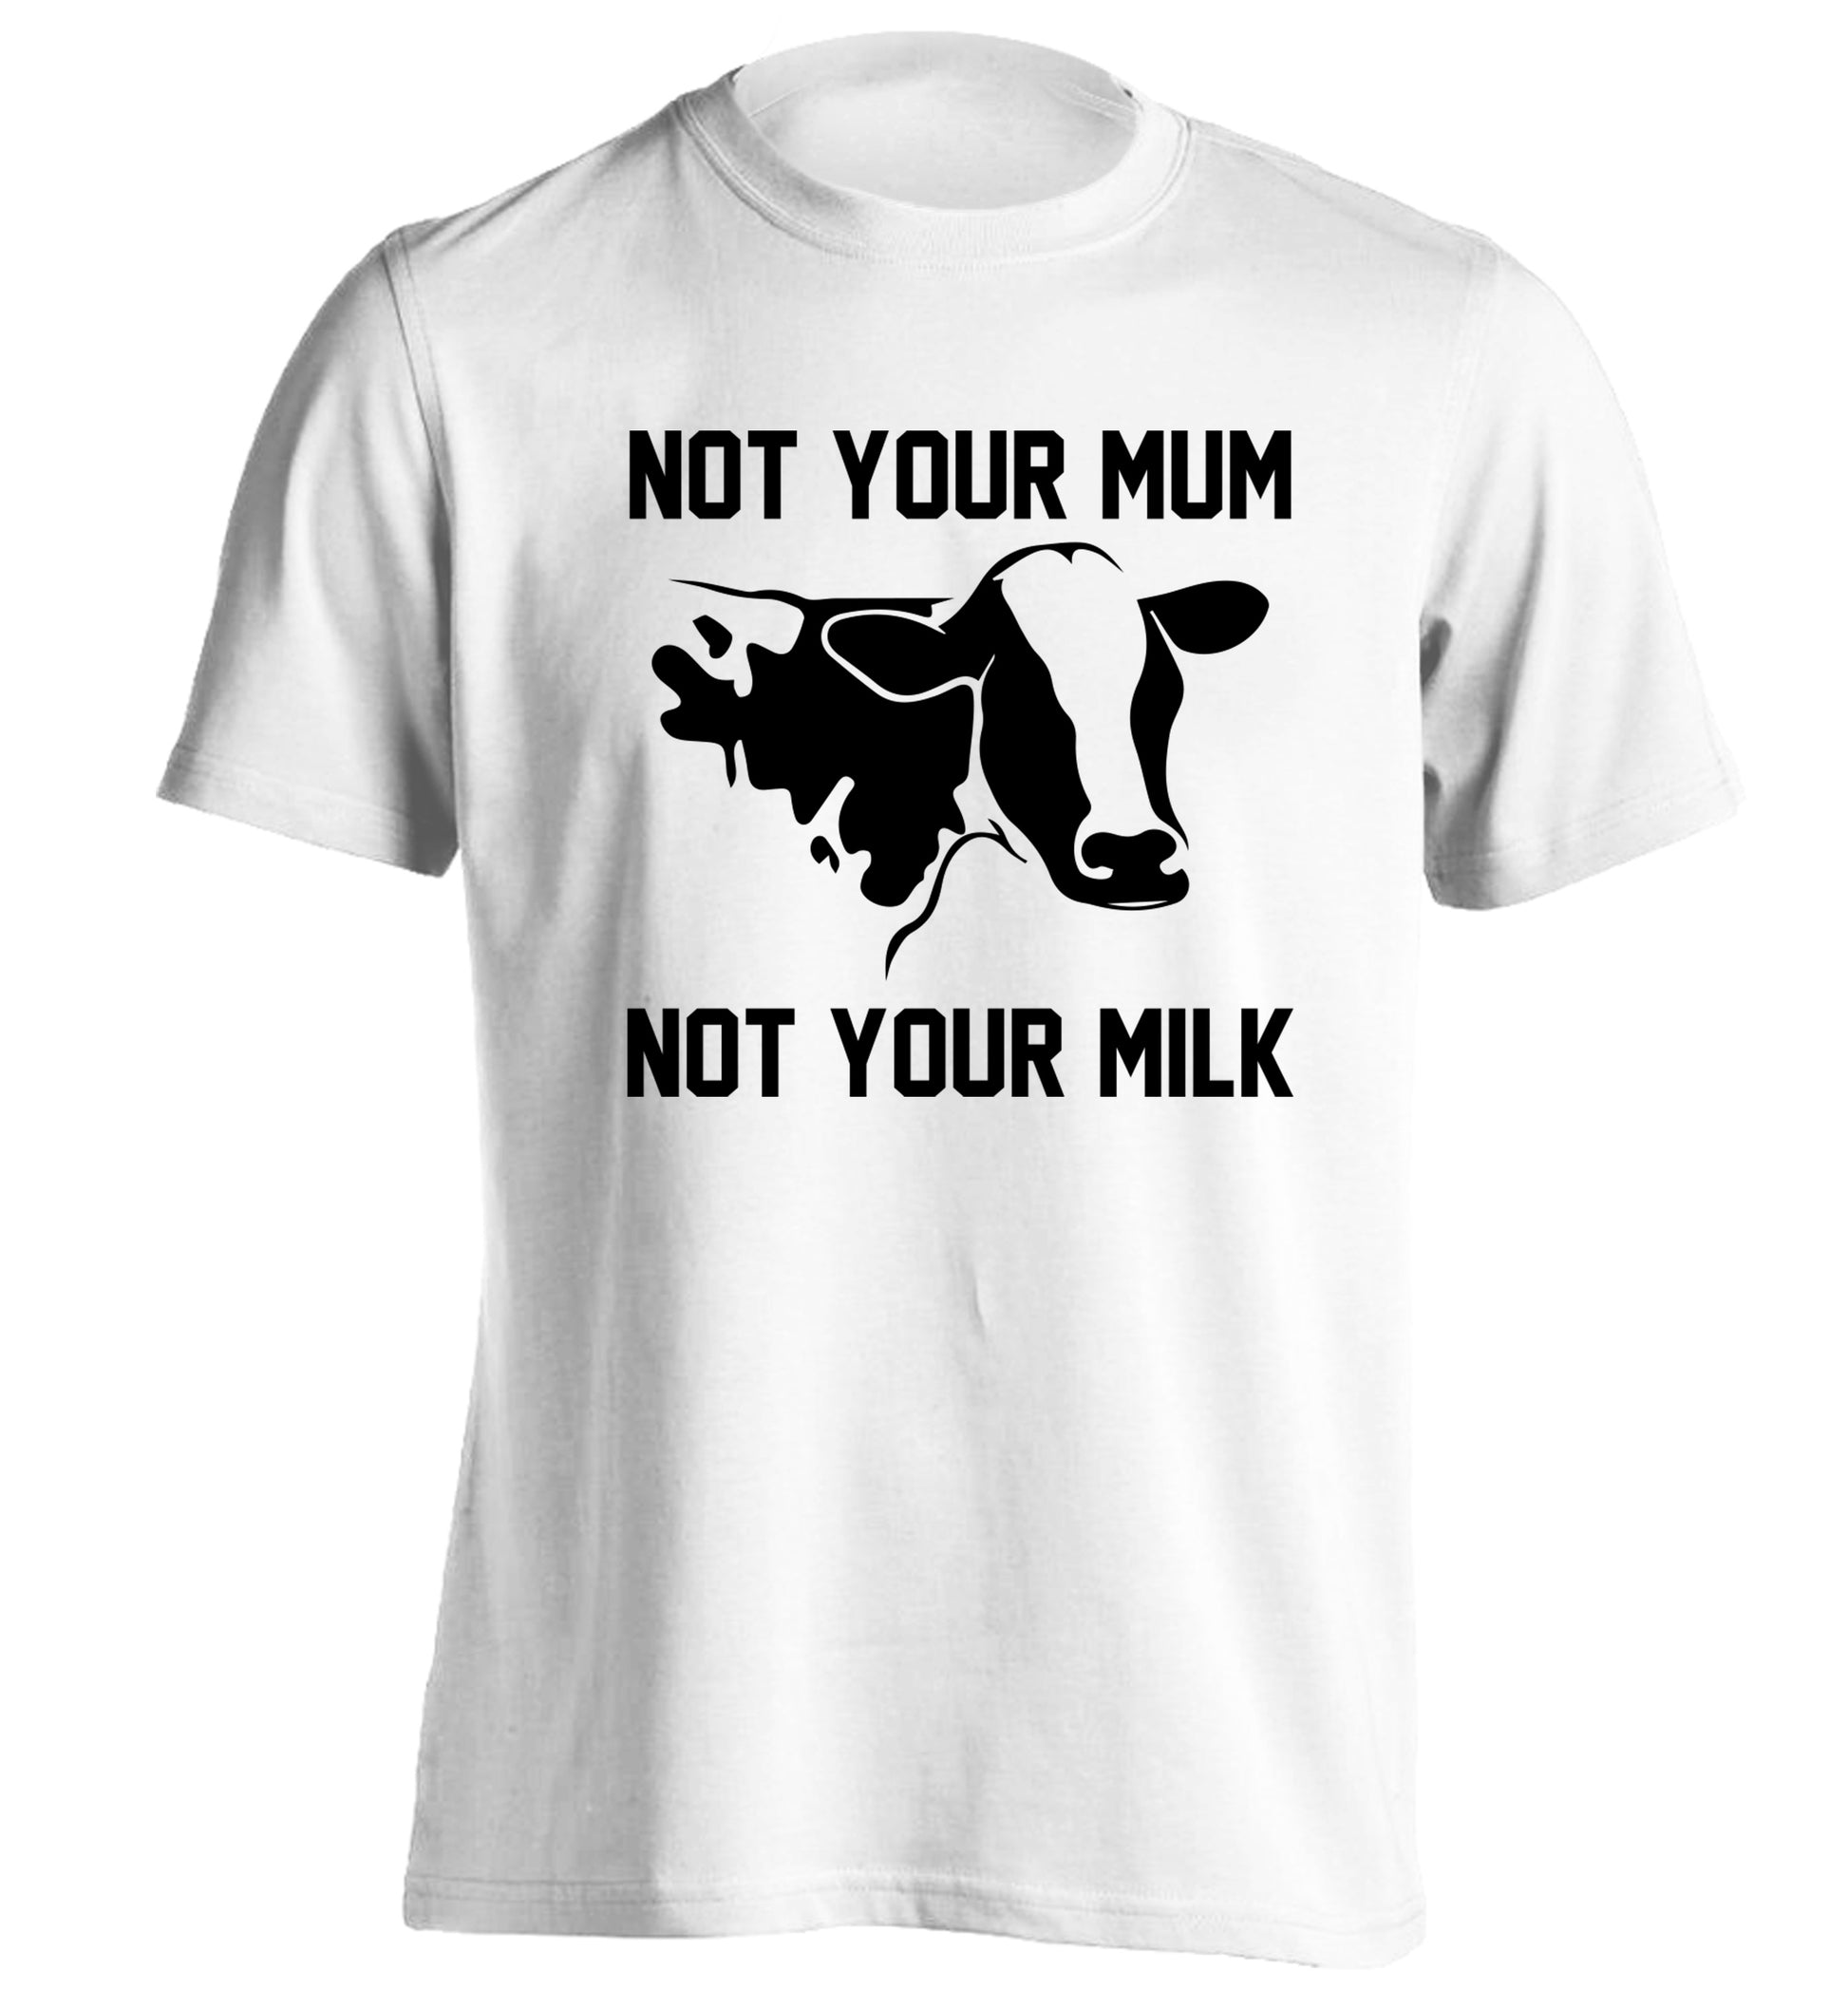 Not your mum not your milk adults unisex white Tshirt 2XL